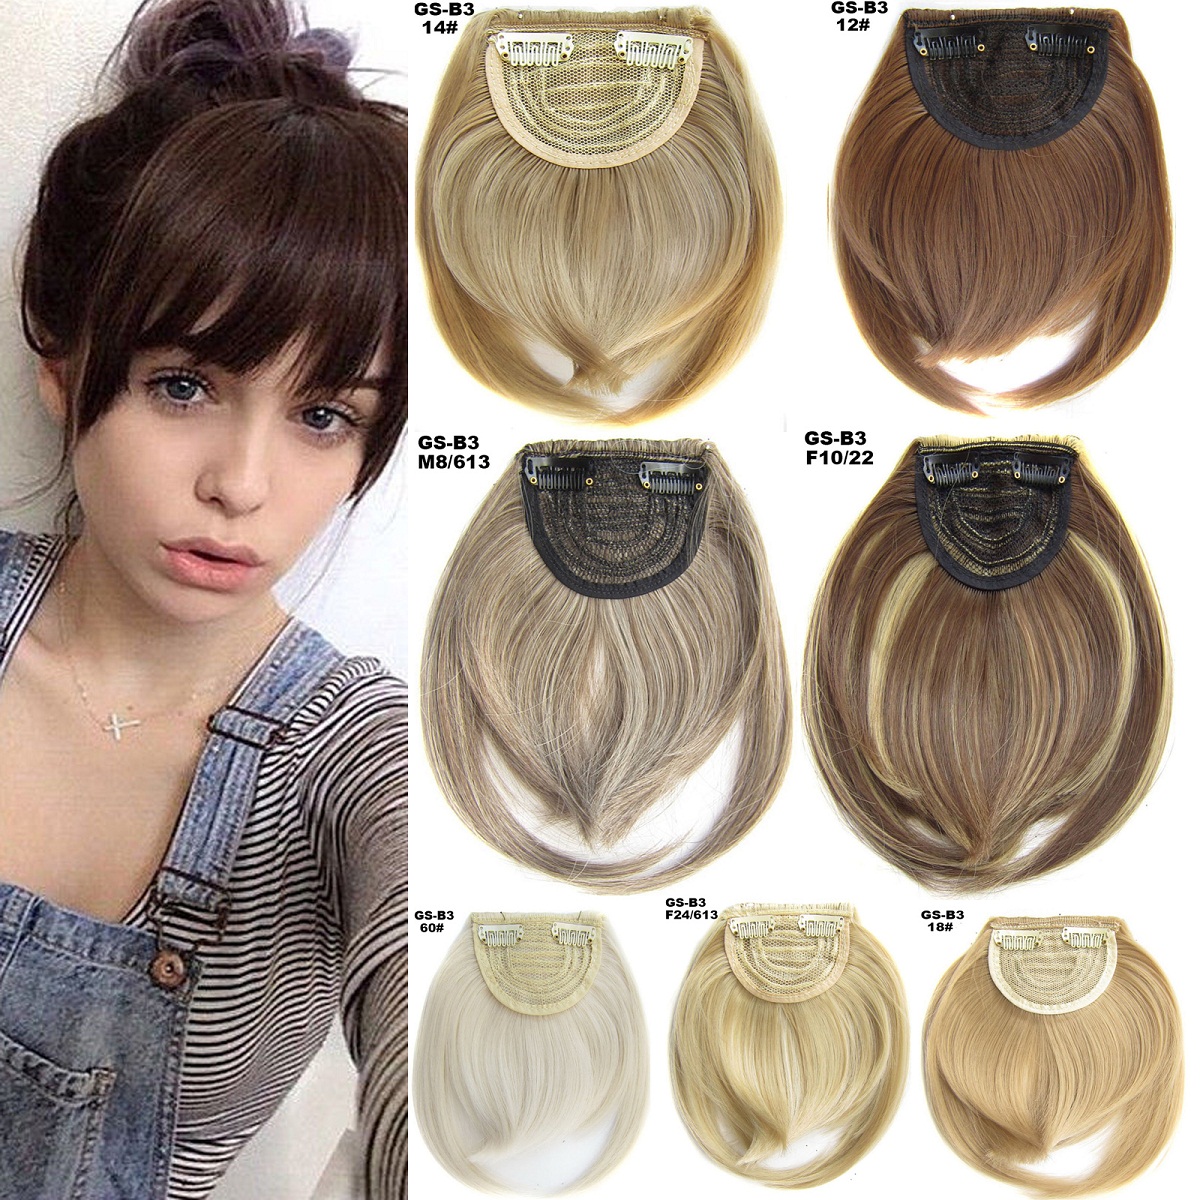 2pcs Side Bangs Clip On Neat Bang Fringes Clip In Hair Extensions